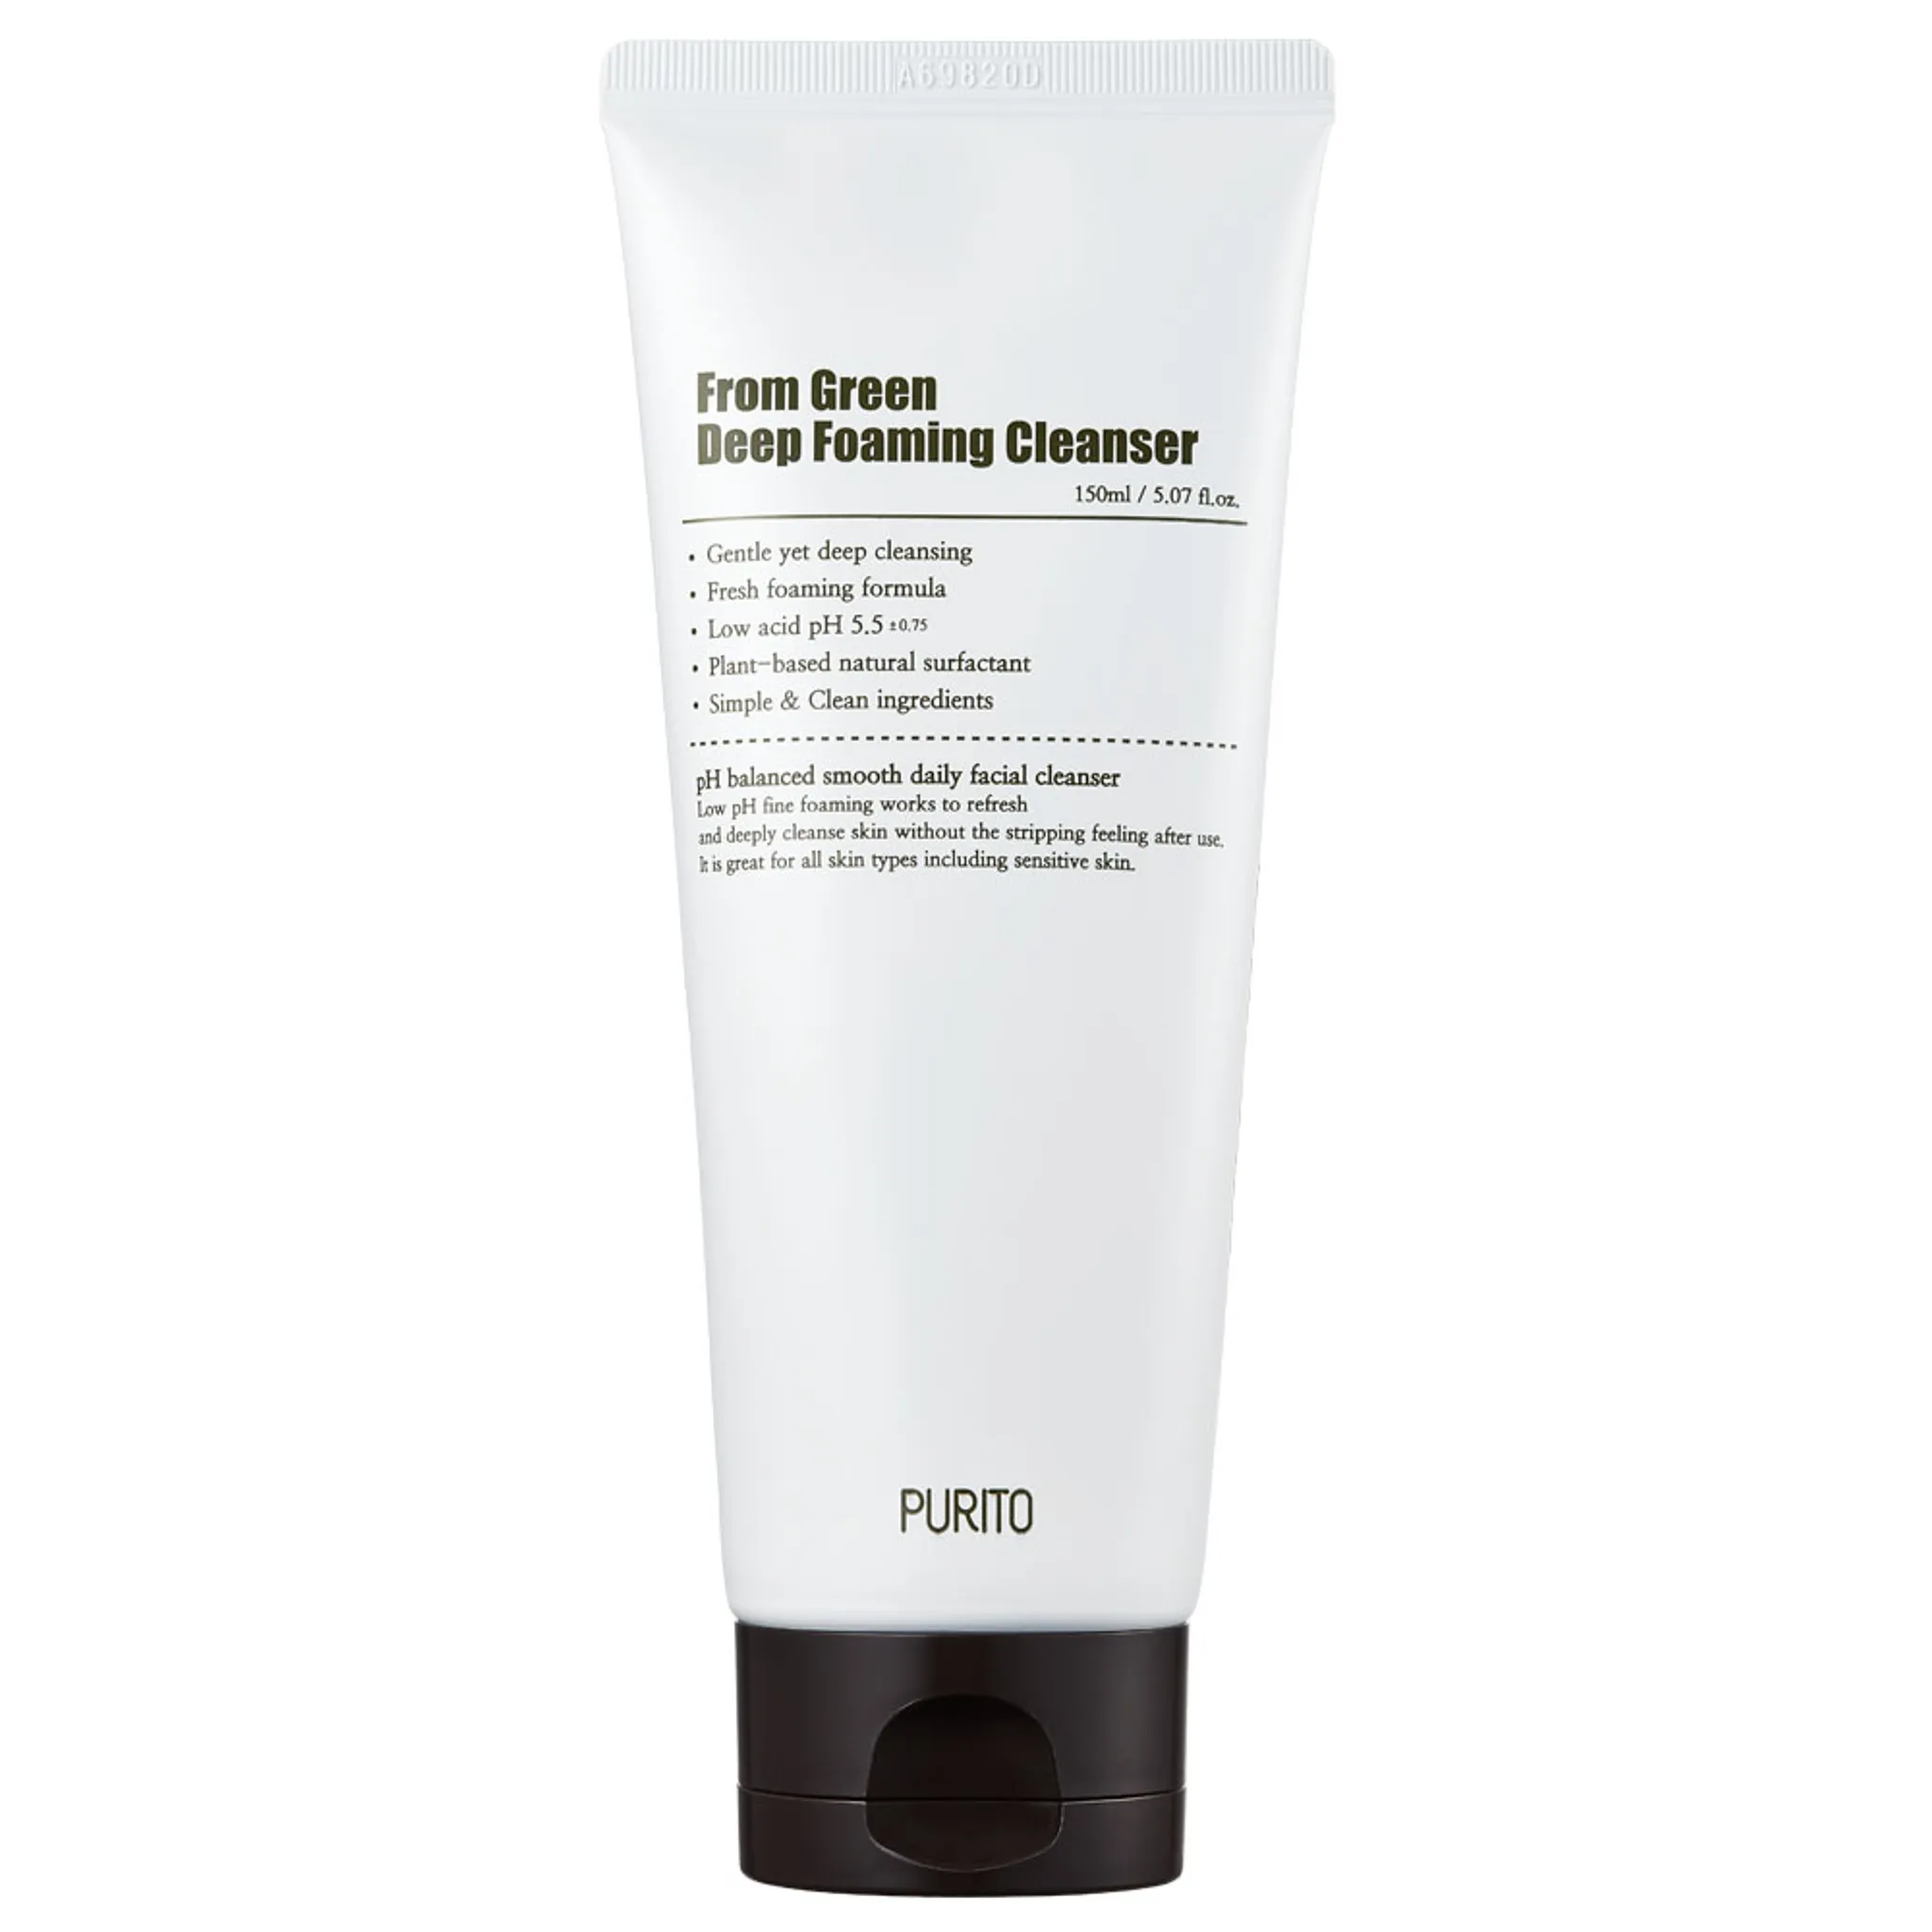 Purito From Green Cleanser Deep Foaming